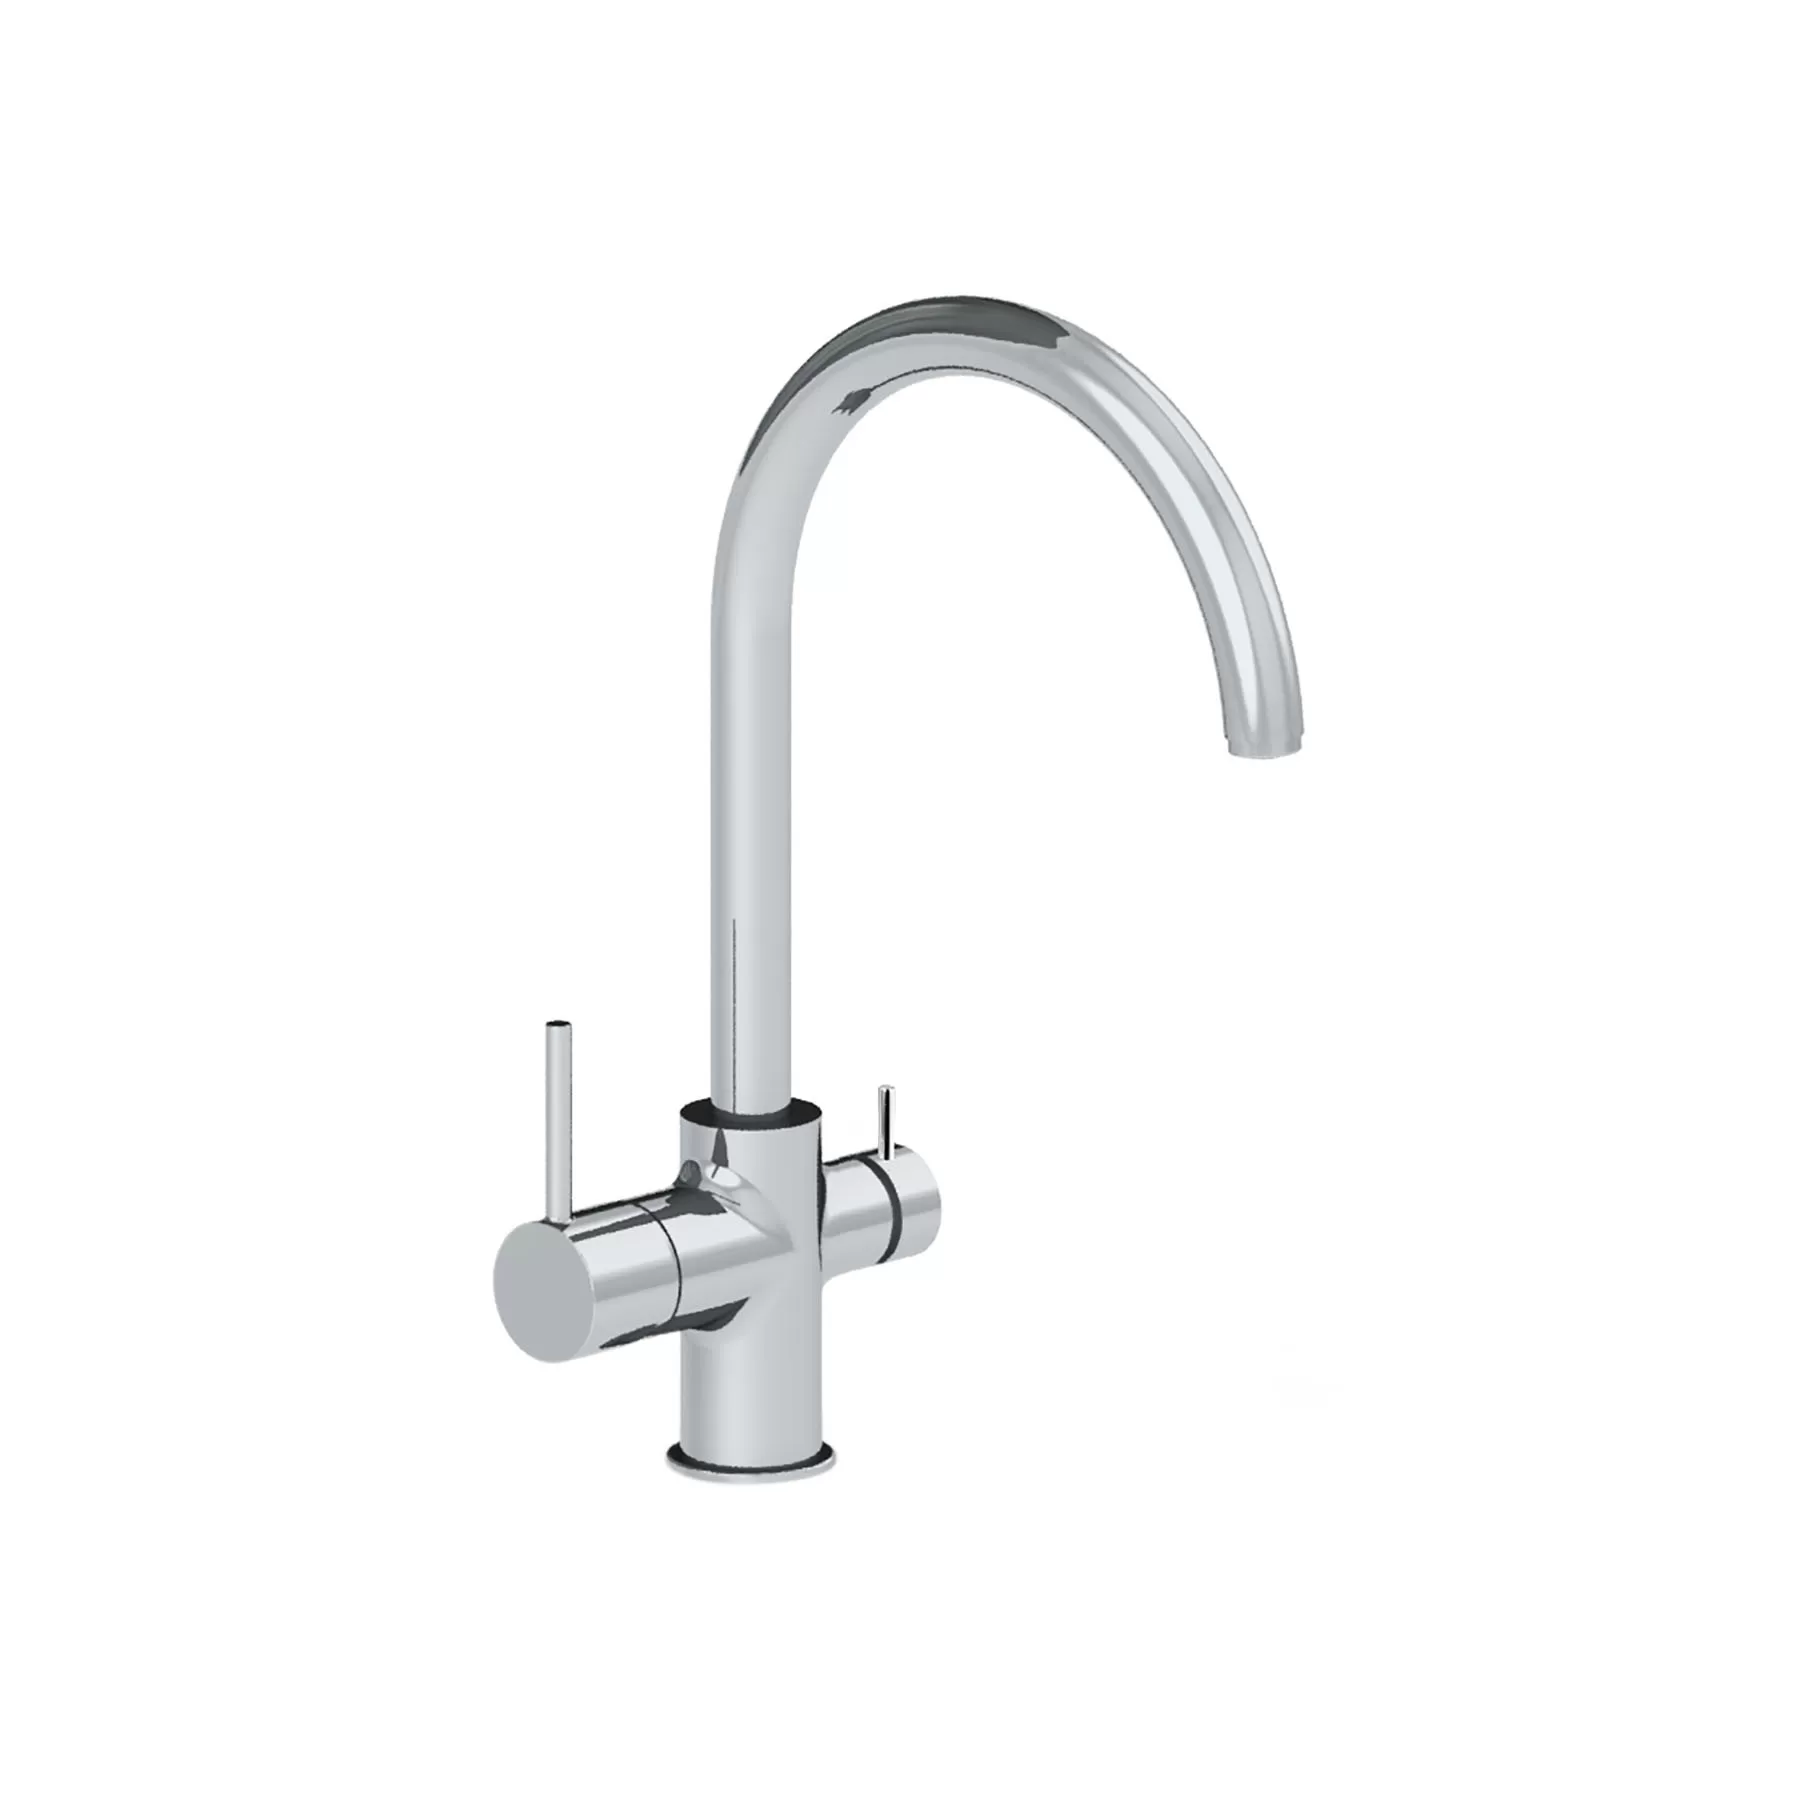 PU15164421, PURITY RONDO PRO KITCHEN FAUCET W.OUTLET FOR FILTERED WATER SWIVEL SPOUT 1/2″ FLEX